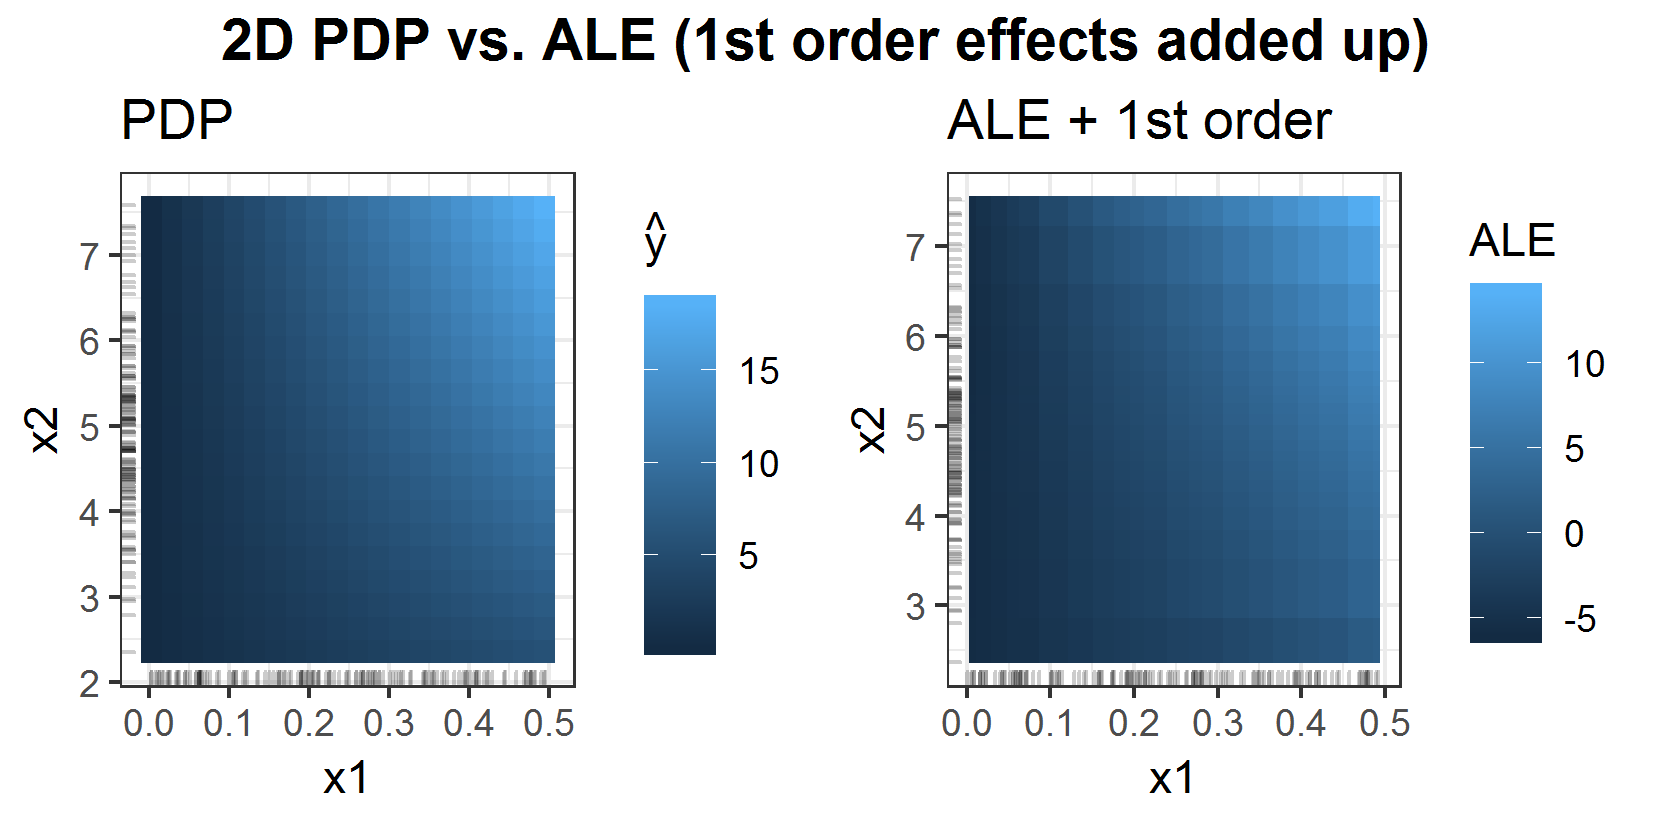 2D PDP vs 2D ALE with added up 1st order effects of features \(x_1\) and \(x_2\) for prediction function \(f(x_1, x_2, x_3) = x_1 x_2 x_3\).